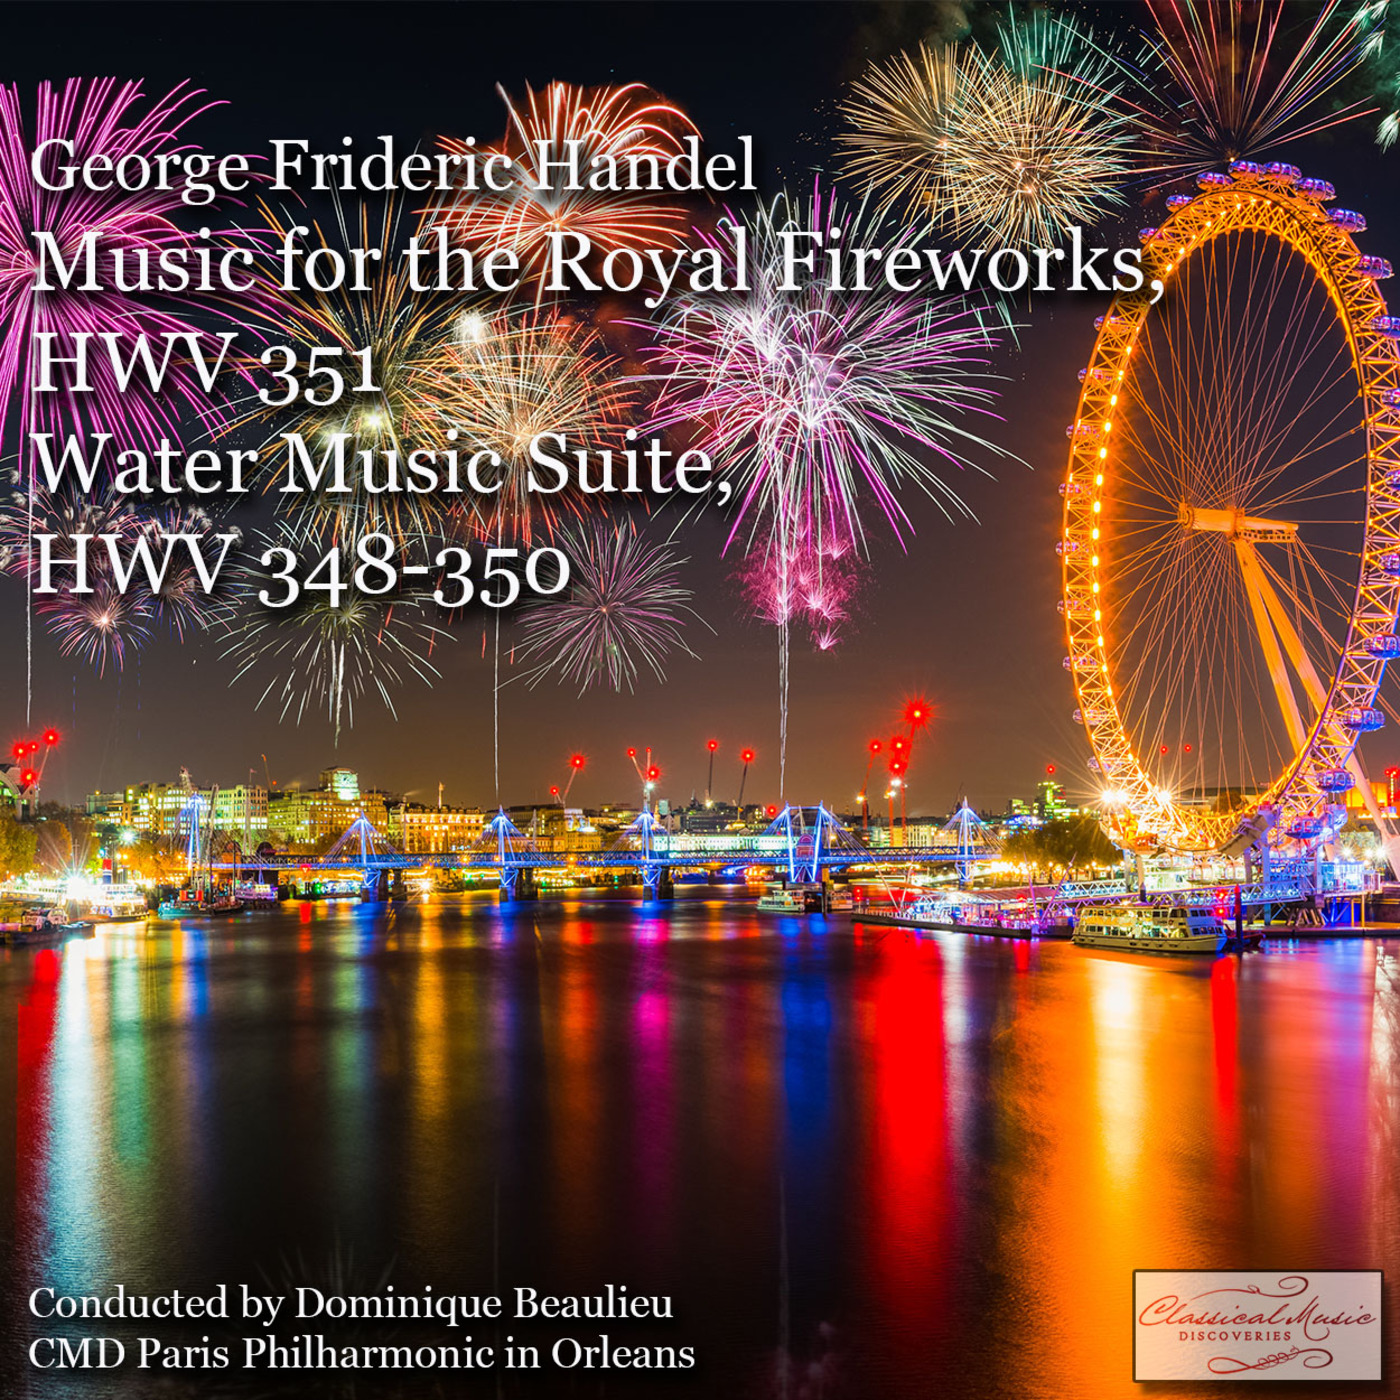 Episode 40: 17040 Handel: Music for the Royal Fireworks and Water Music Suites